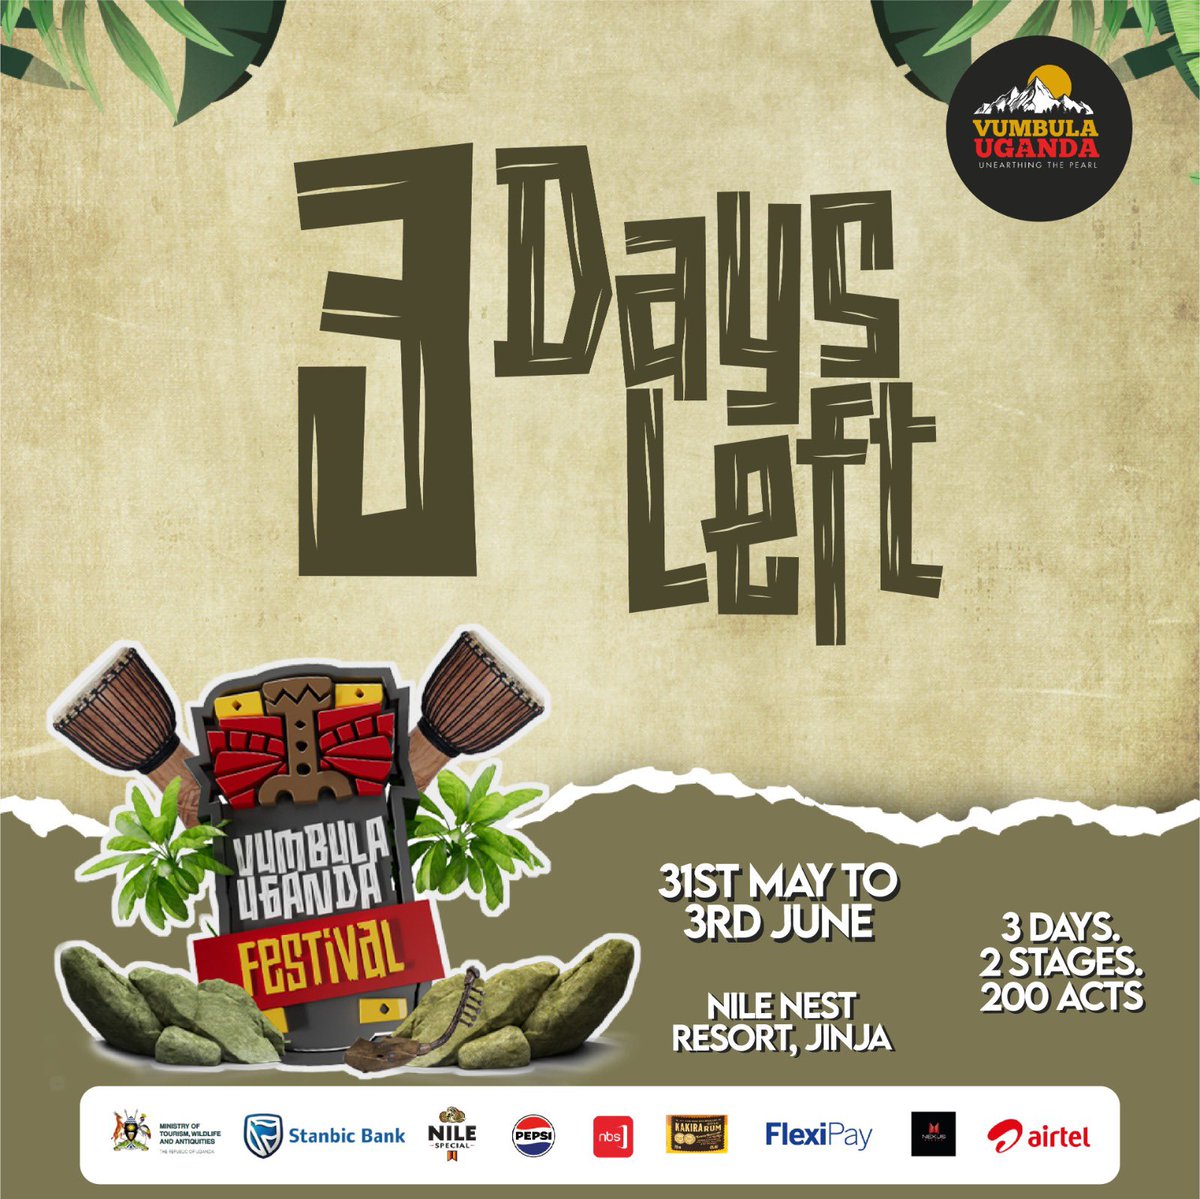 4 days remaining to the biggest festival. Have you purchased your tickets yet? #VumbulaUgandaFestival is taking place from May 31st to June 3rd at Nile Nest Resort Jinja. #GreeningTheNile